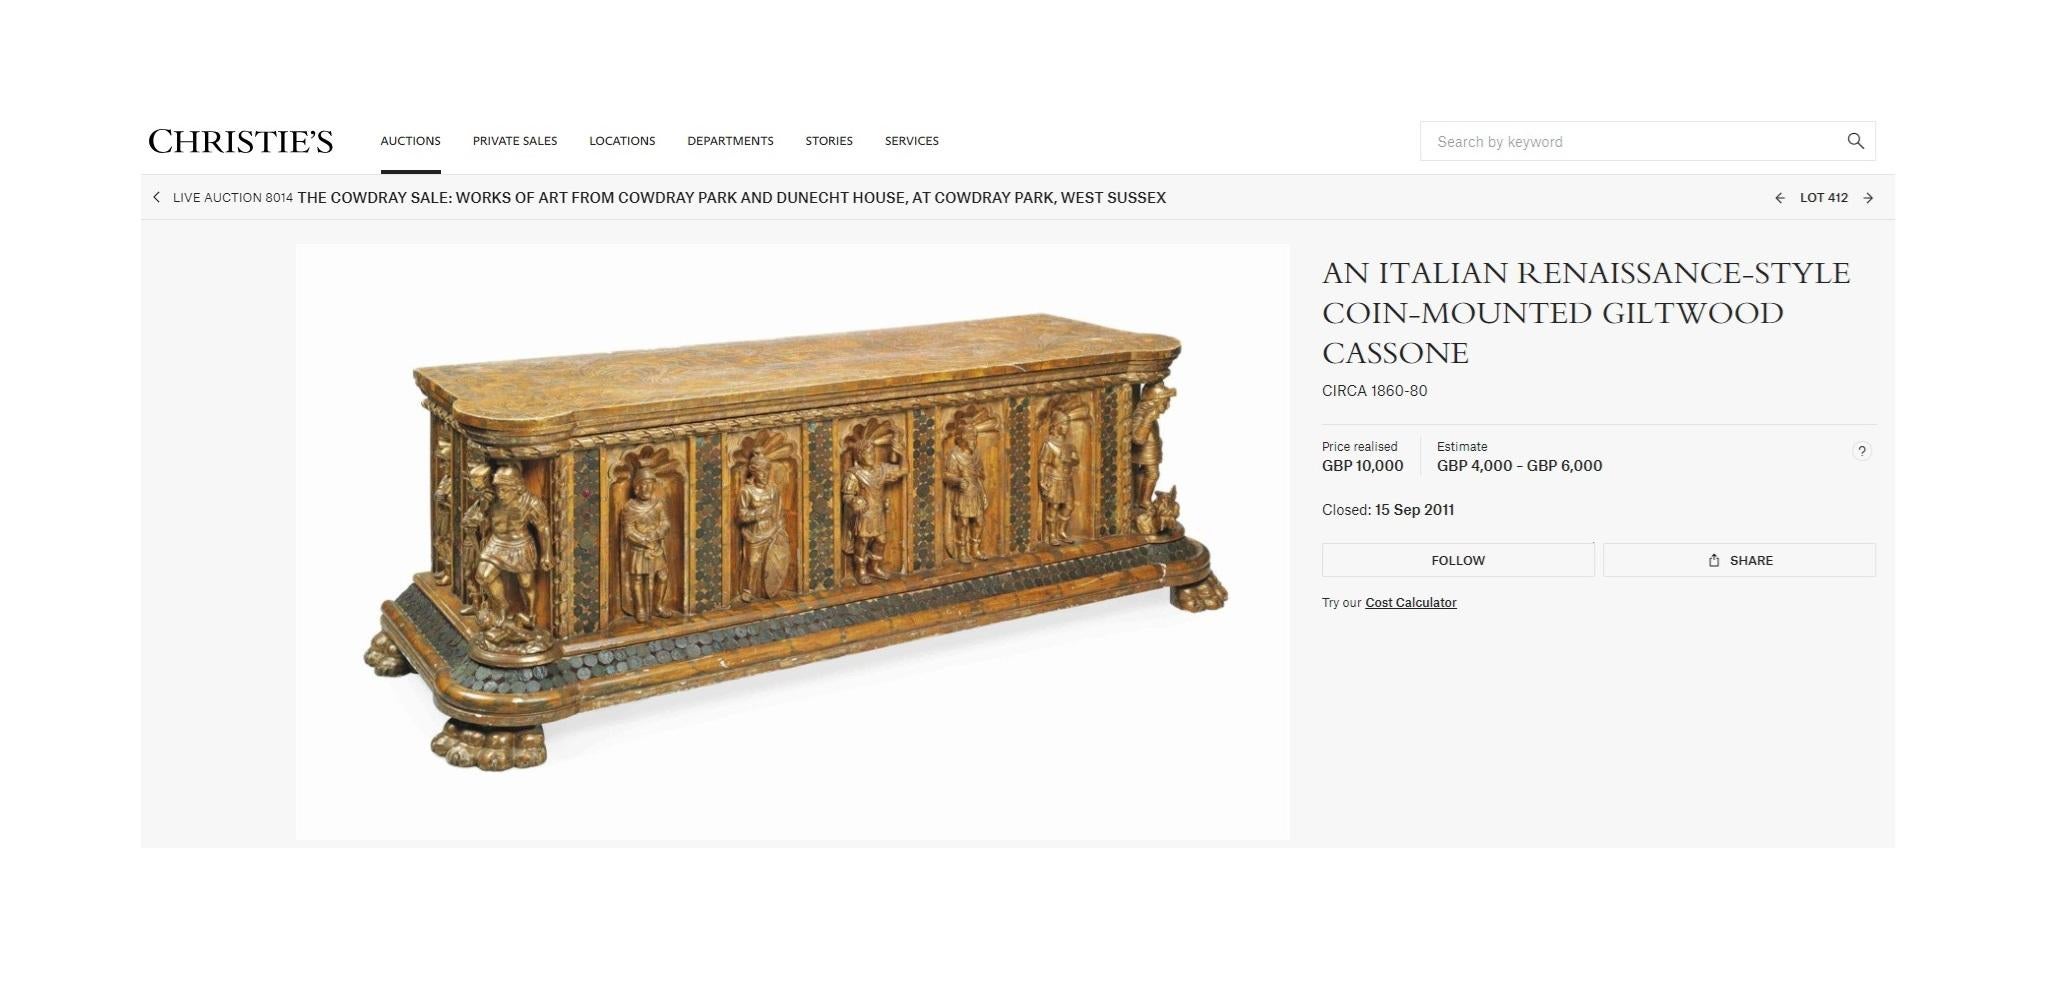 Royal House Antiques

Royal House Antiques is delighted to offer for sale this super decorative Italian Renaissance Coin mounted Giltwood Cassone trunk circa 1860-1880 which was sold in Christies in The Cowdray Sale: Works of Art from Cowdray Park